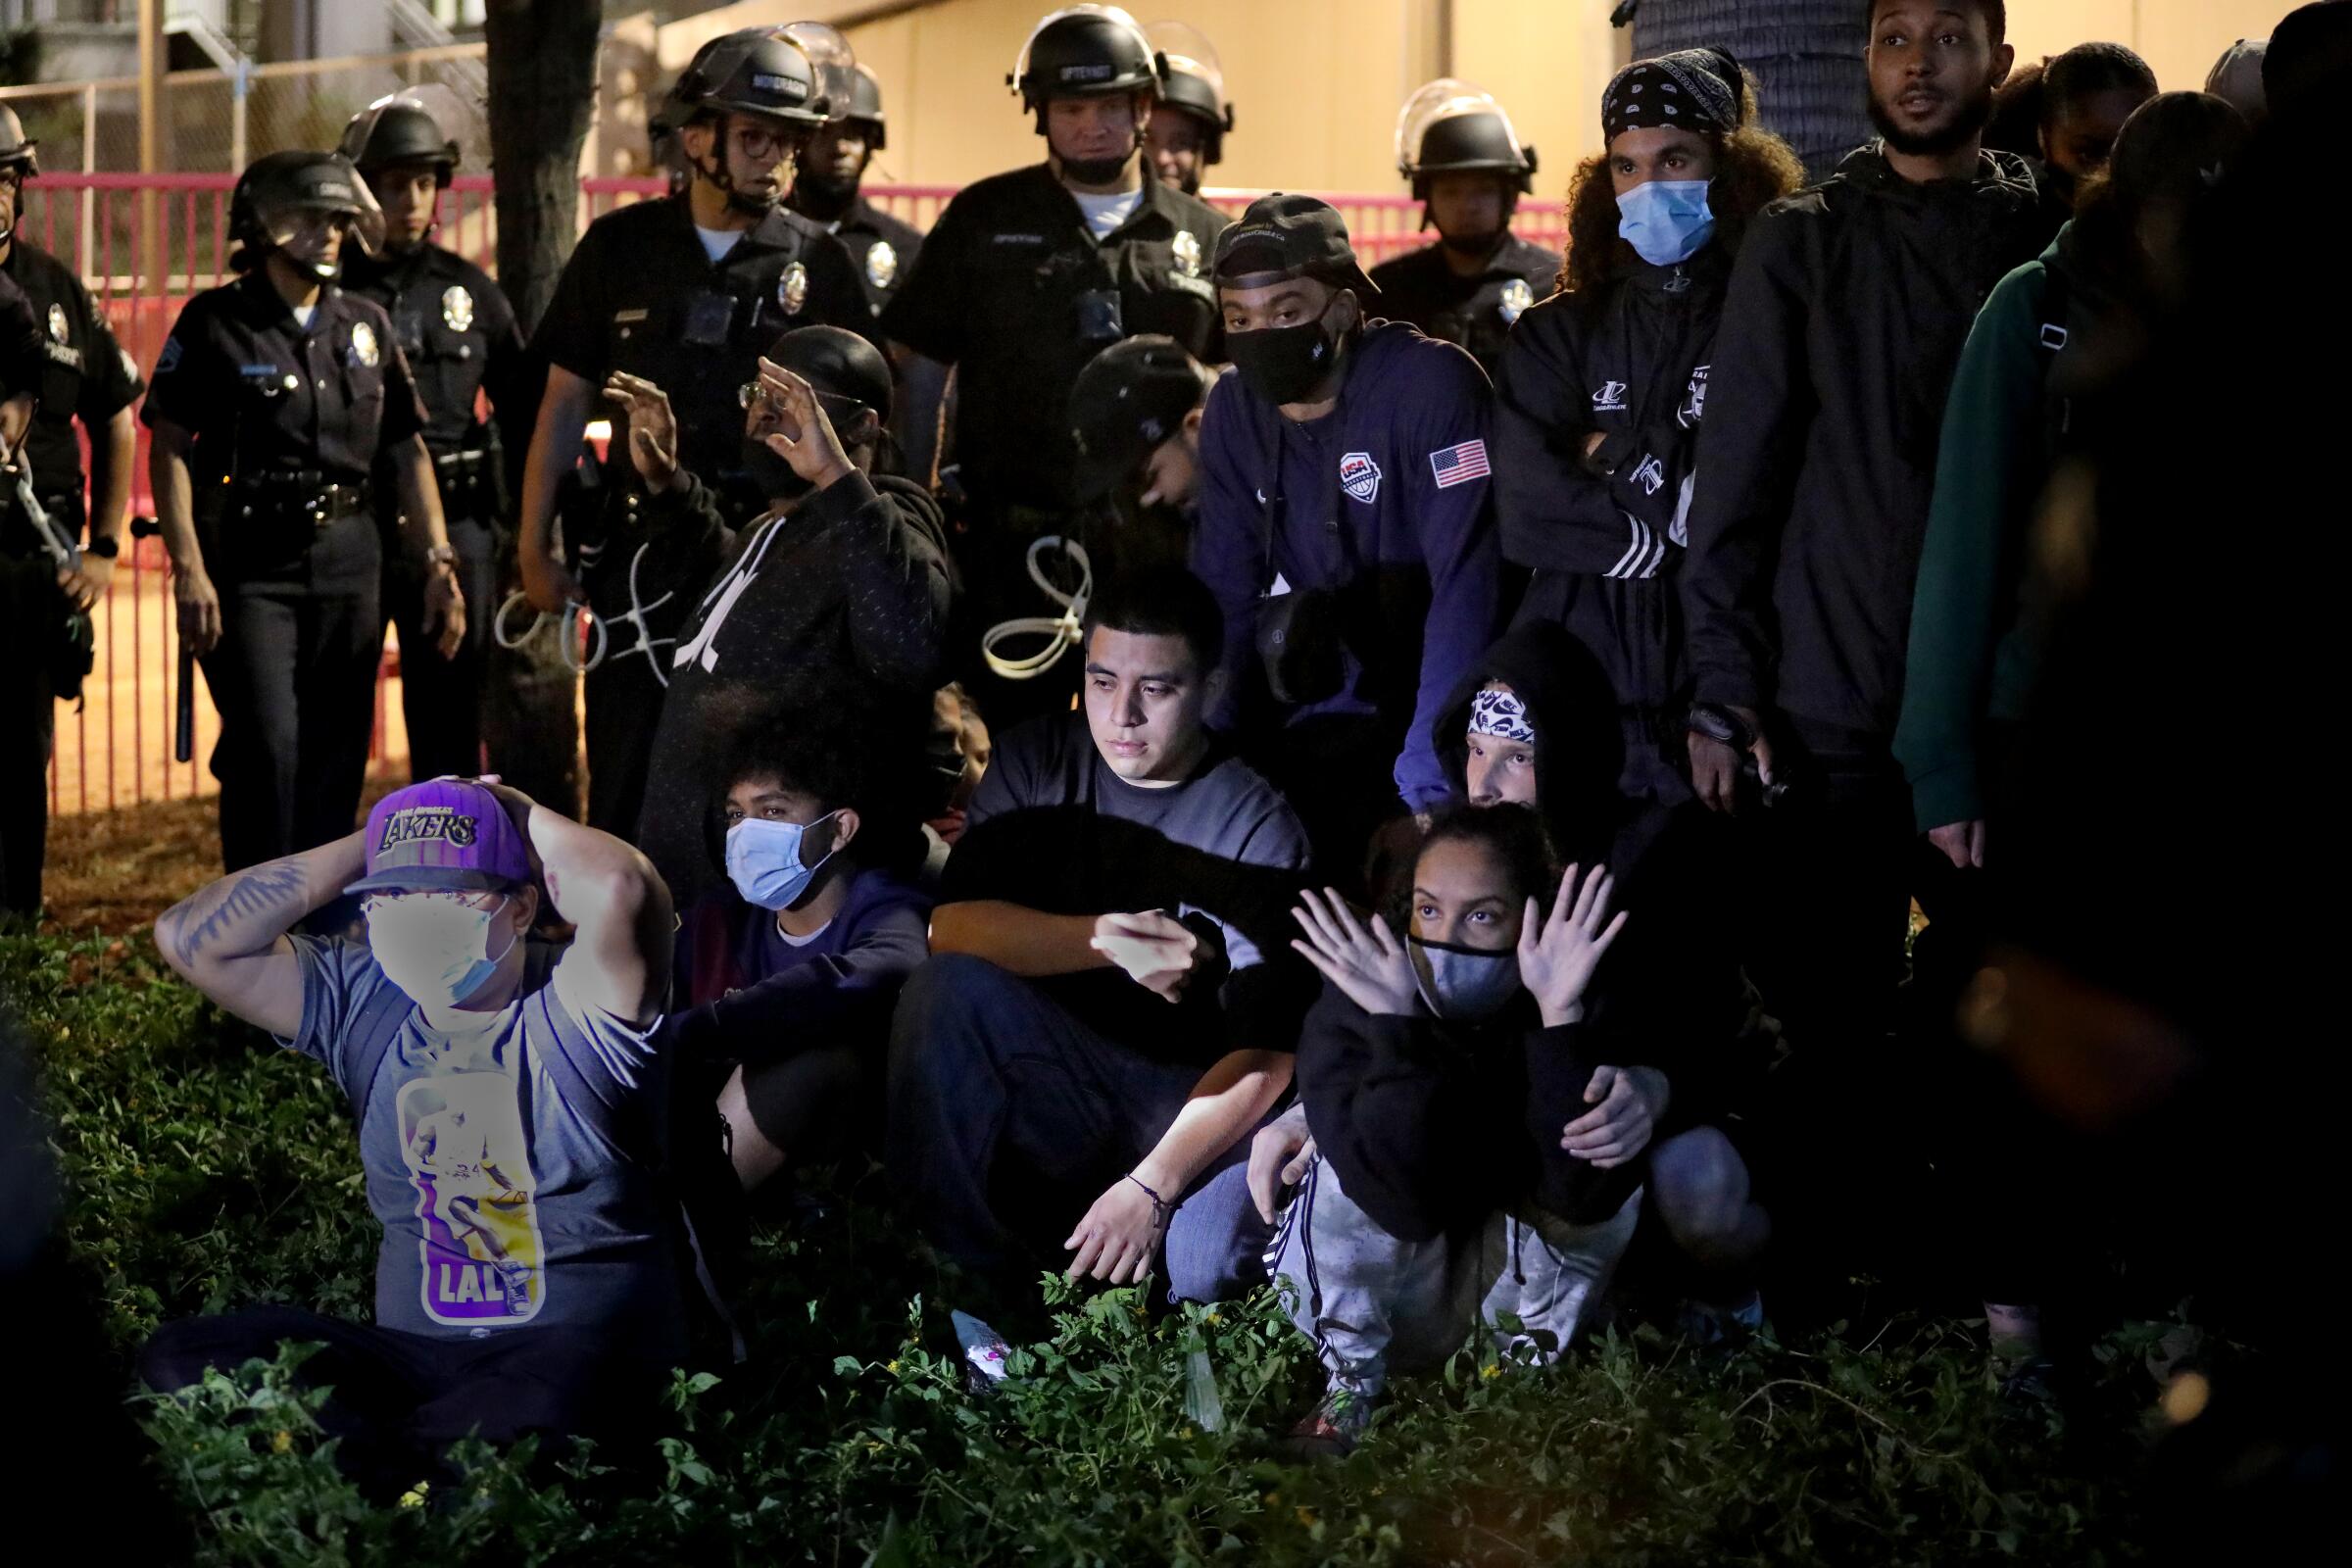 Police in helmets stand behind a group of arrestees who are seated on the ground